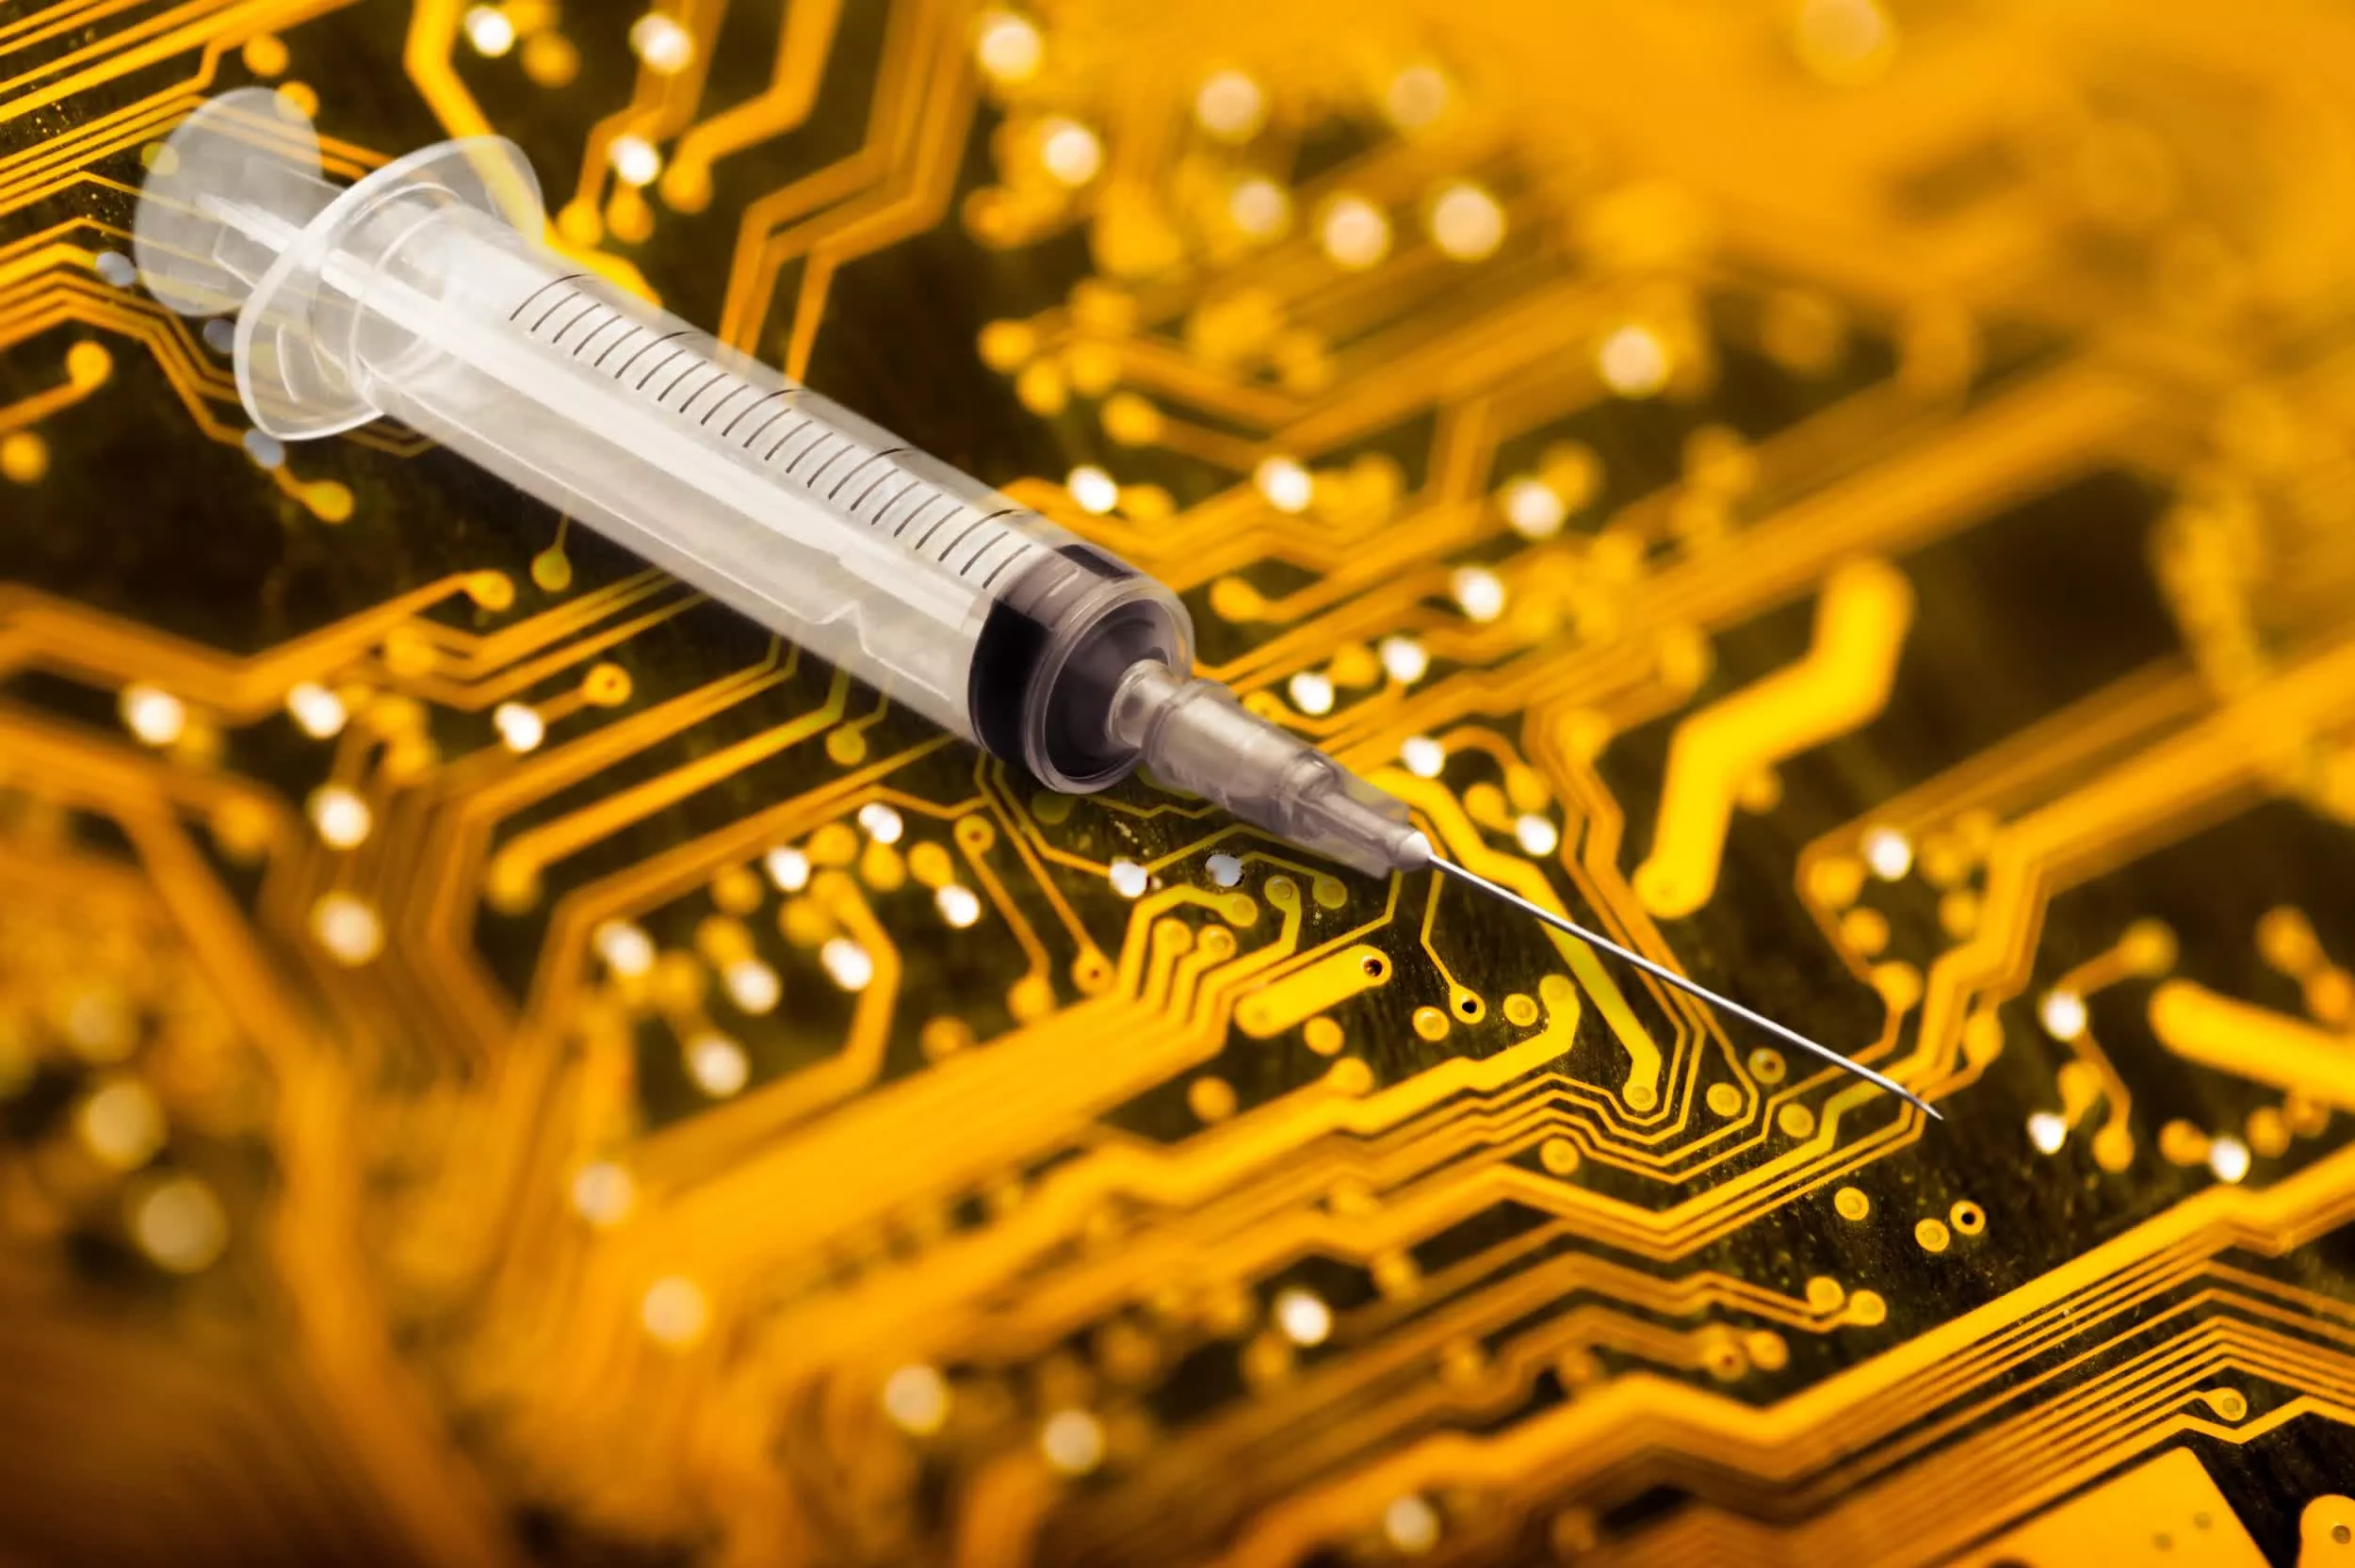 Researchers develop an injectable, microscopic chip to monitor physiological conditions